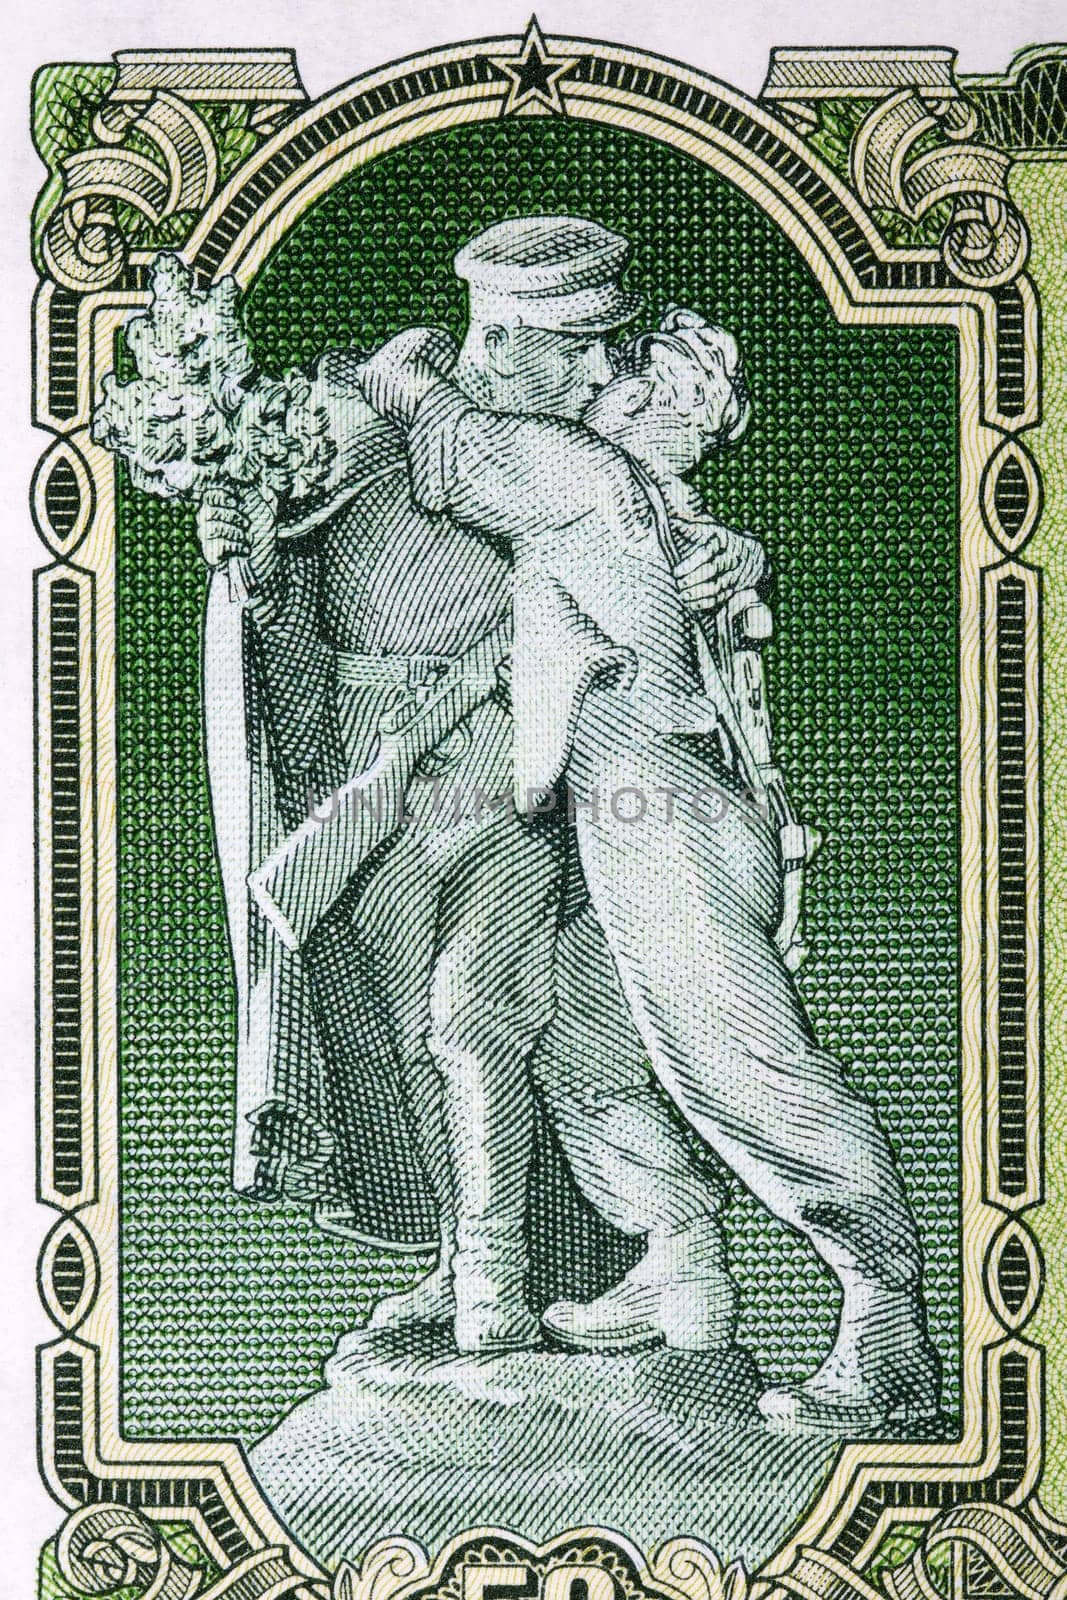 Statue of partisan with Russian soldier from Czechoslovak money by johan10